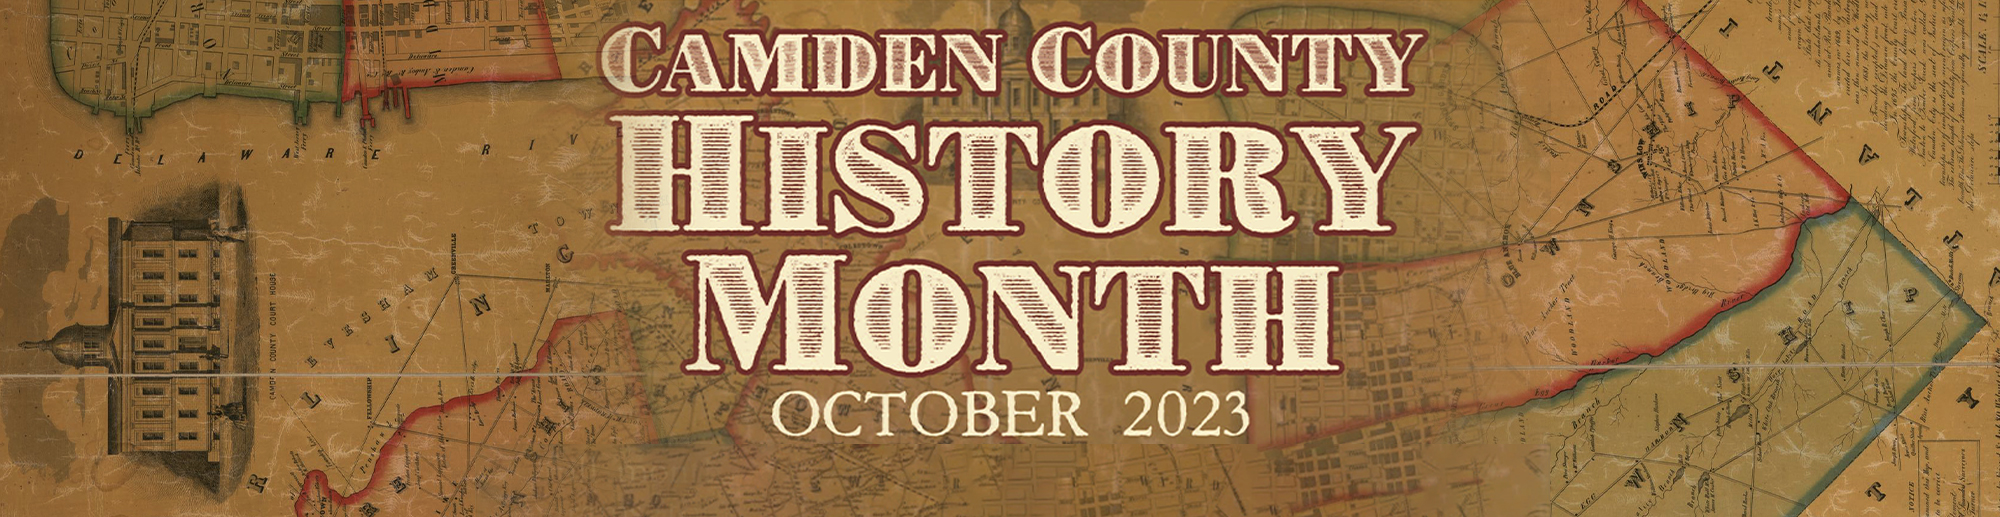 Camden County History Month